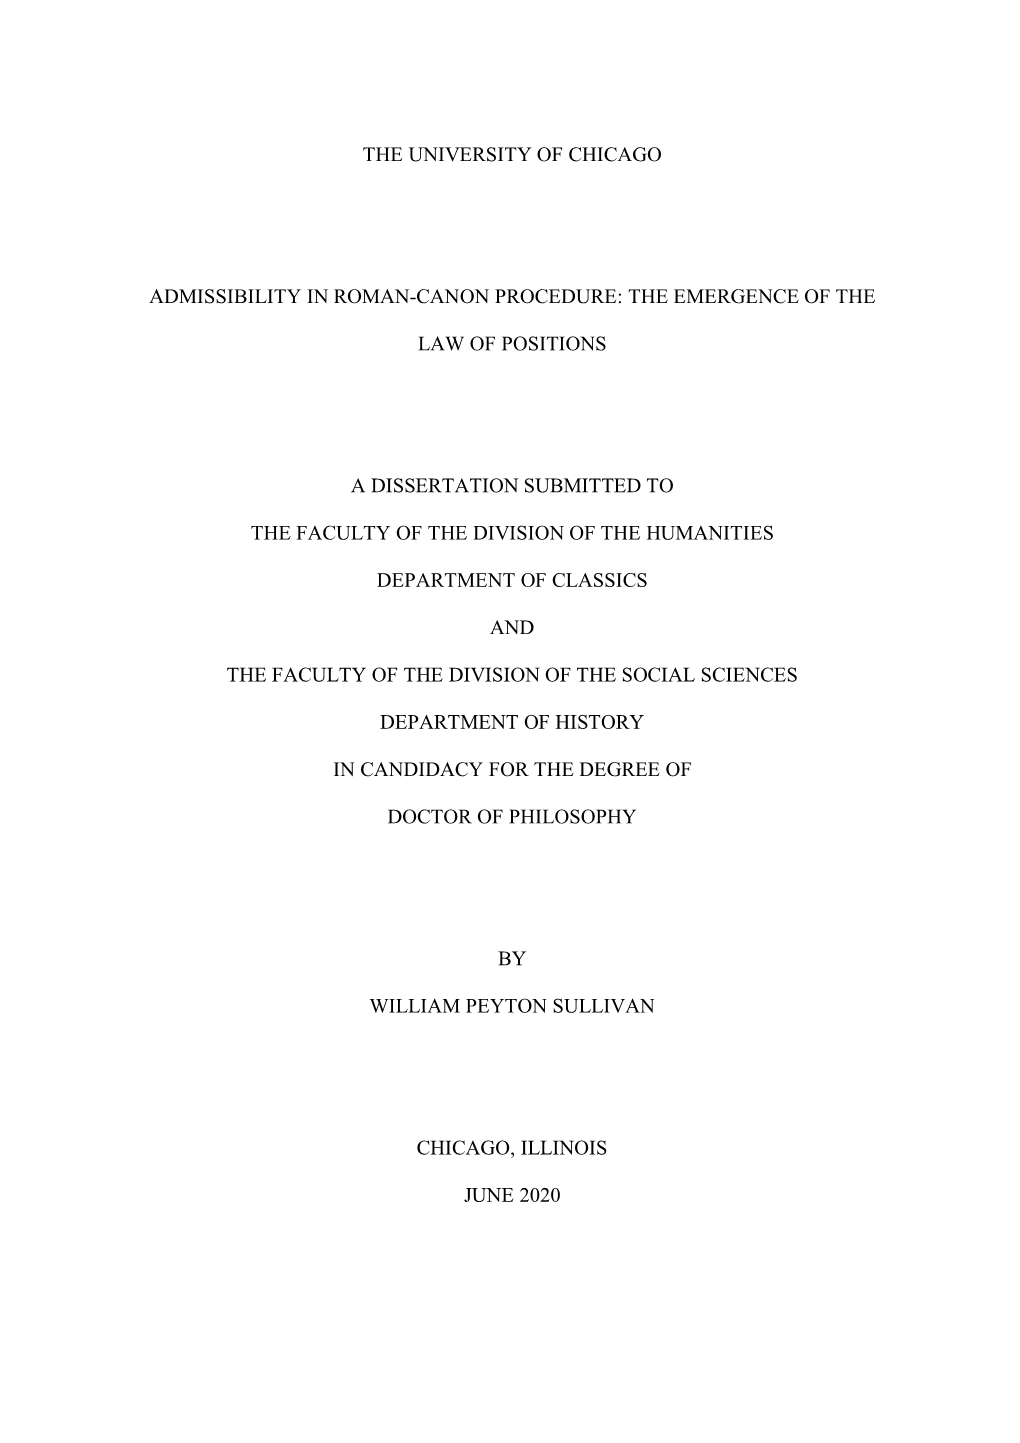 The University of Chicago Admissibility in Roman-Canon Procedure: the Emergence of the Law of Positions a Dissertation Submitted